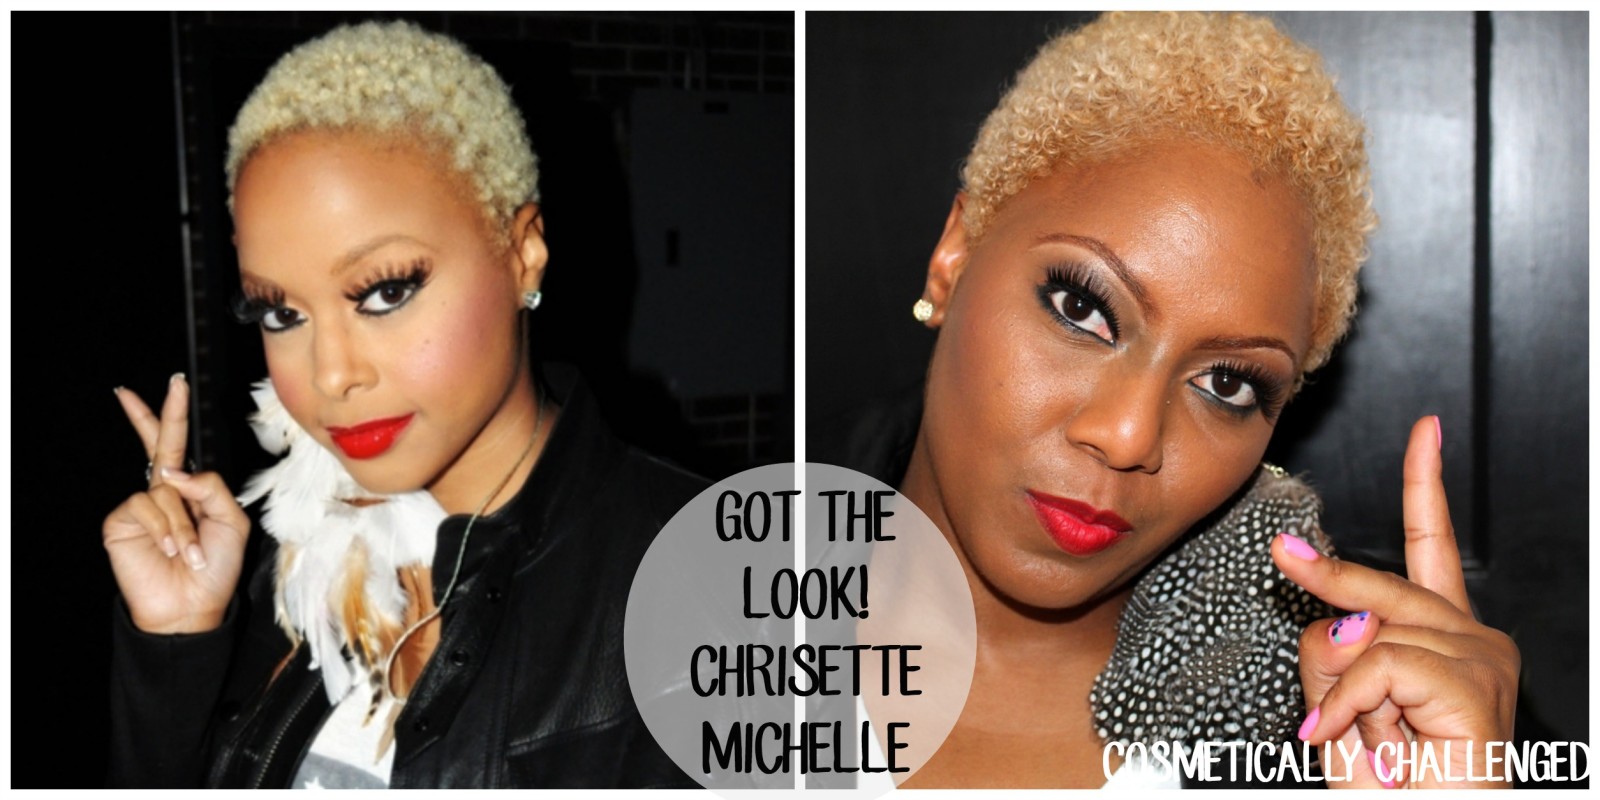 I Got the Look! Channeling Chrisette Michele